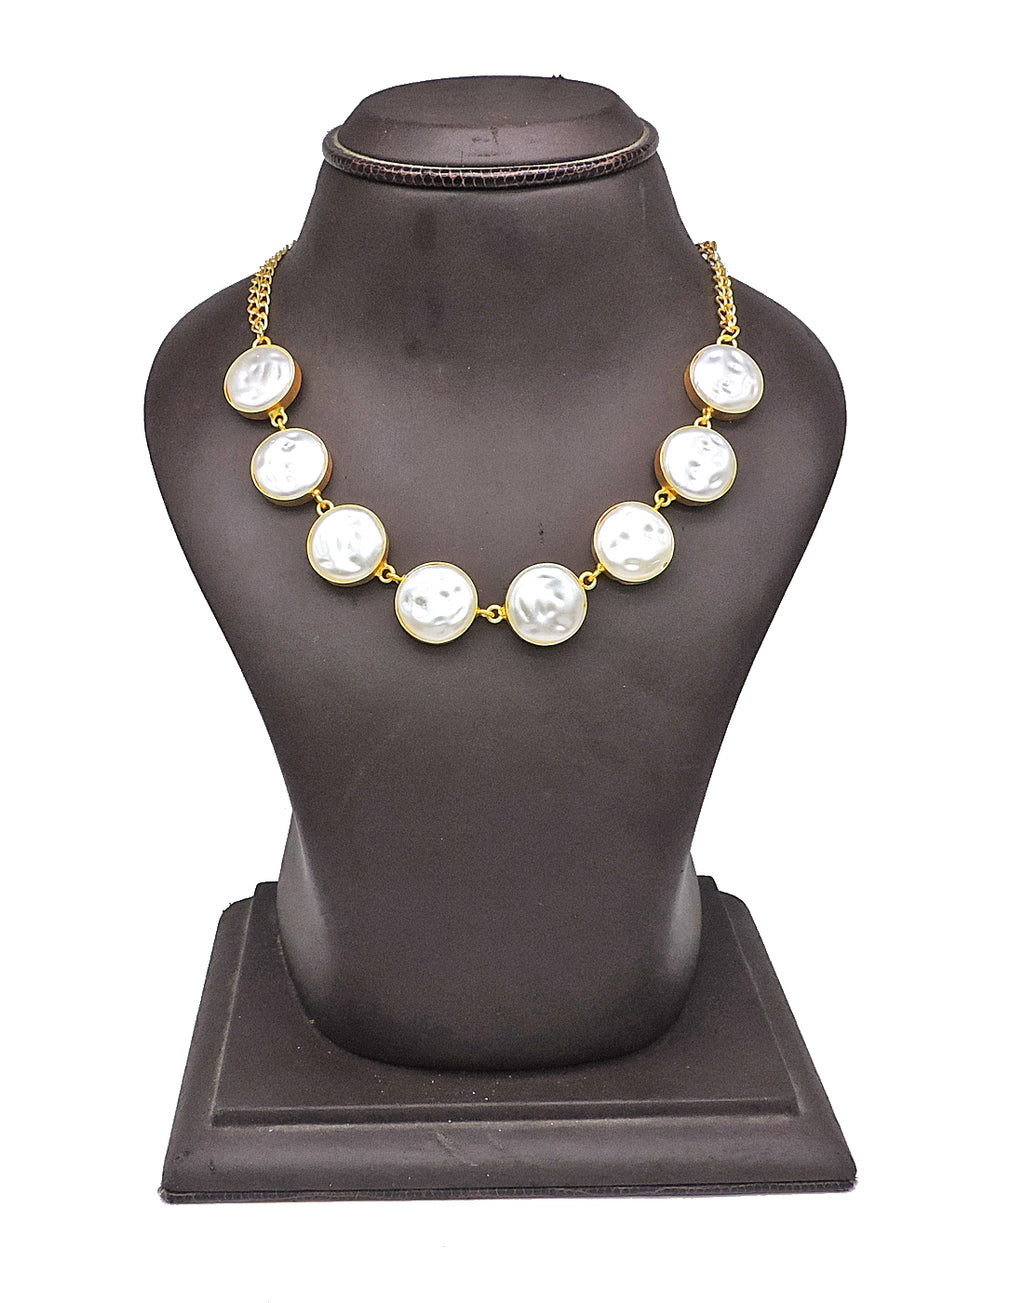 Baroque Pearl Necklace - Statement Necklaces - Gold-Plated & Hypoallergenic Jewellery - Made in India - Dubai Jewellery - Dori